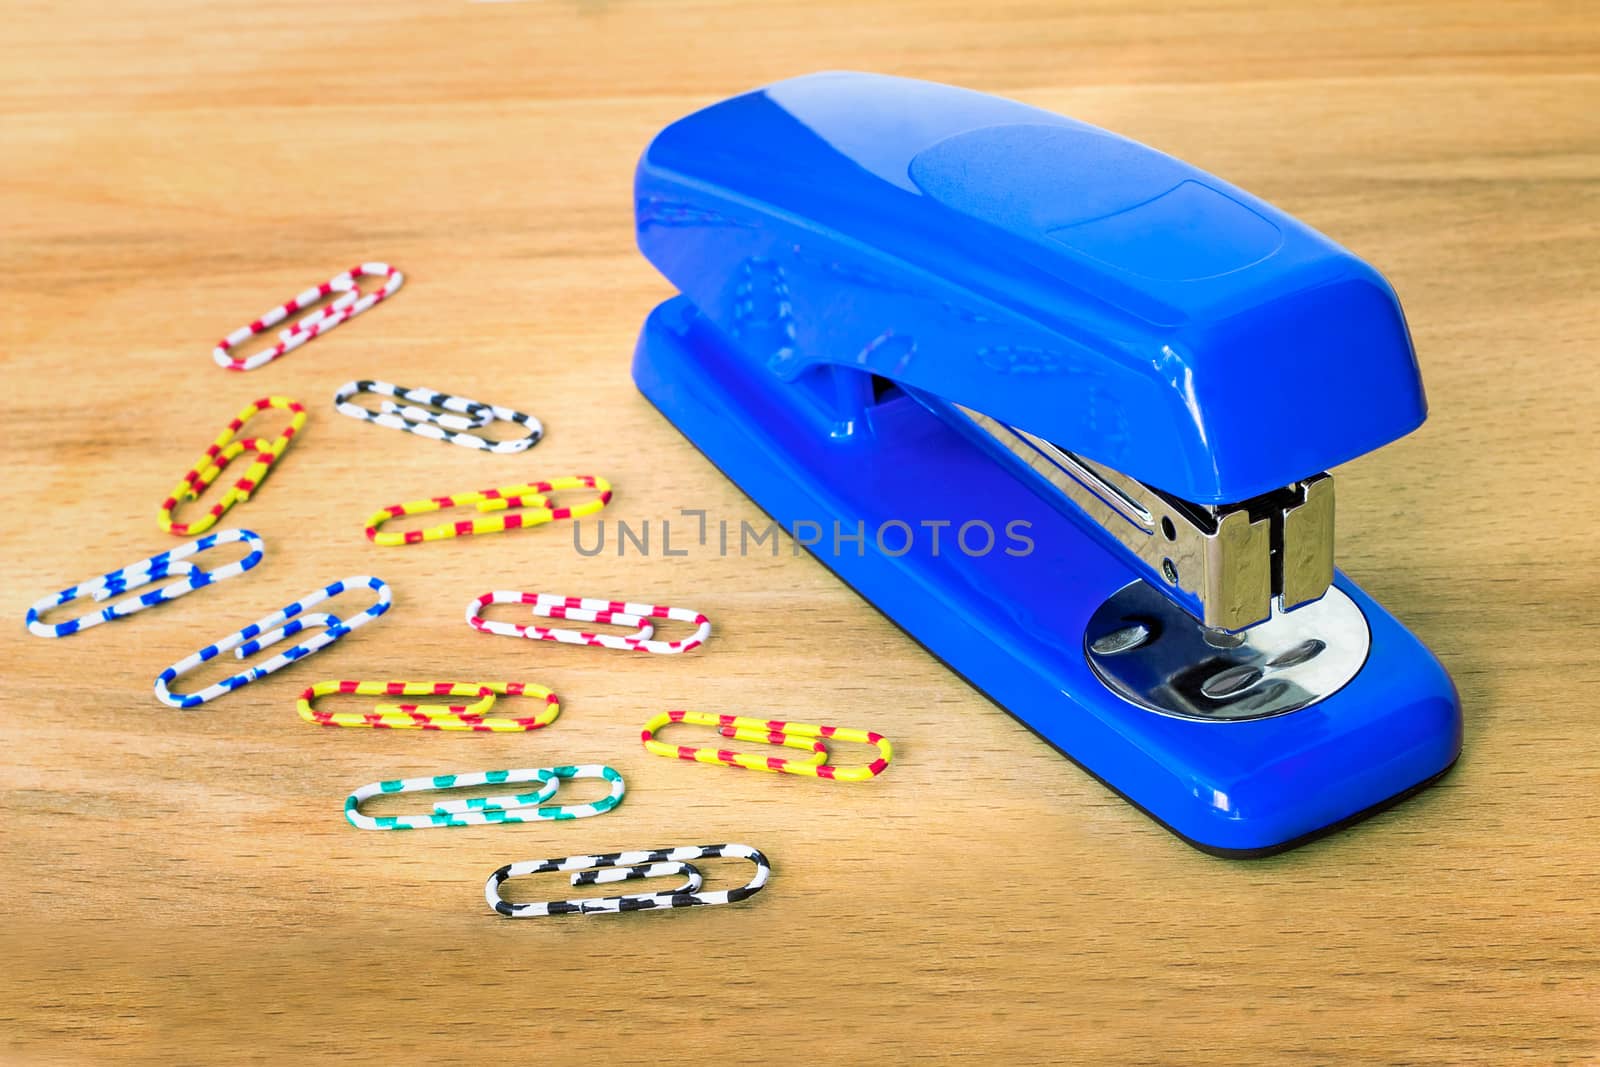 Bright the blue stapler and multi-colored paper clips lie on a table.